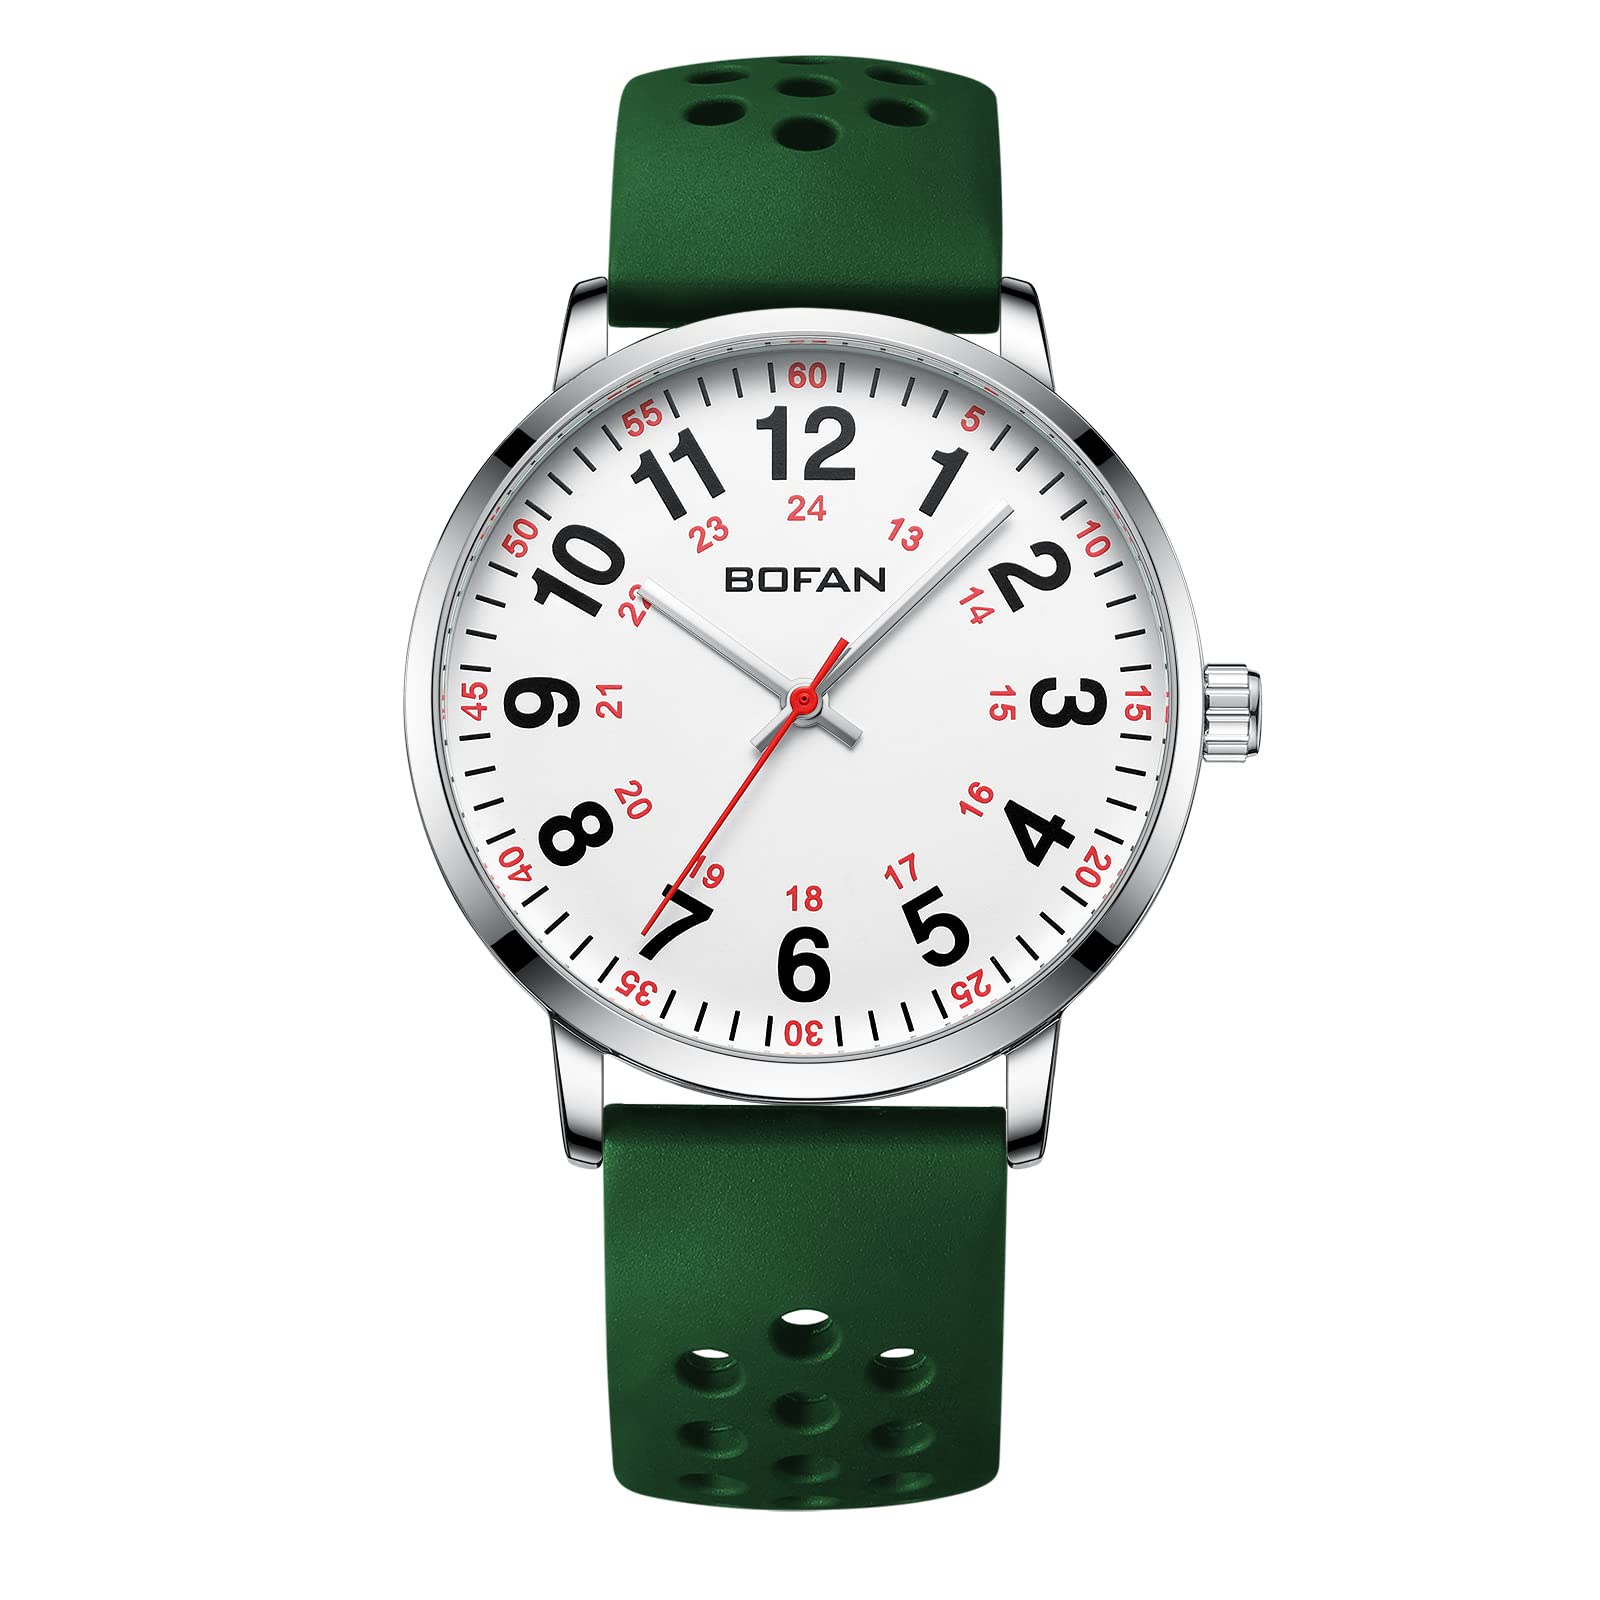 BOFAN Nurse Watch for Nurse,Medical Professionals,Students,Doctors with Various Medical Scrub Colors,Easy to Read Dial,Second Hand and 24 Hour,Soft and Breathable Silicone Band,Water Resistant.